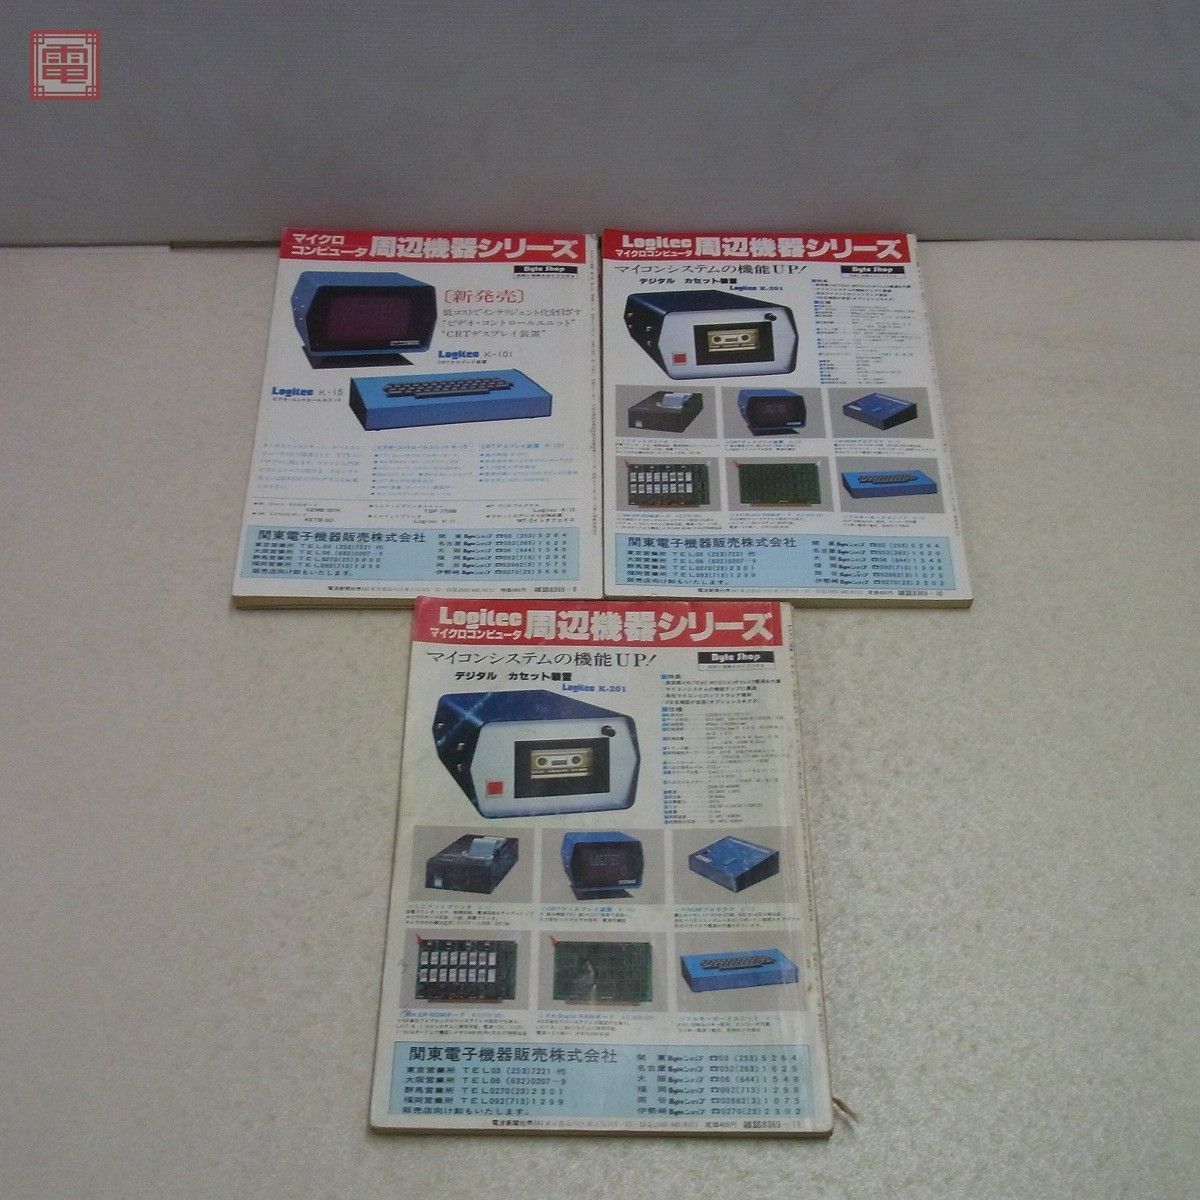  magazine monthly microcomputer 1977 year ~1979 year 10 pcs. set don't fit radio wave newspaper company [20